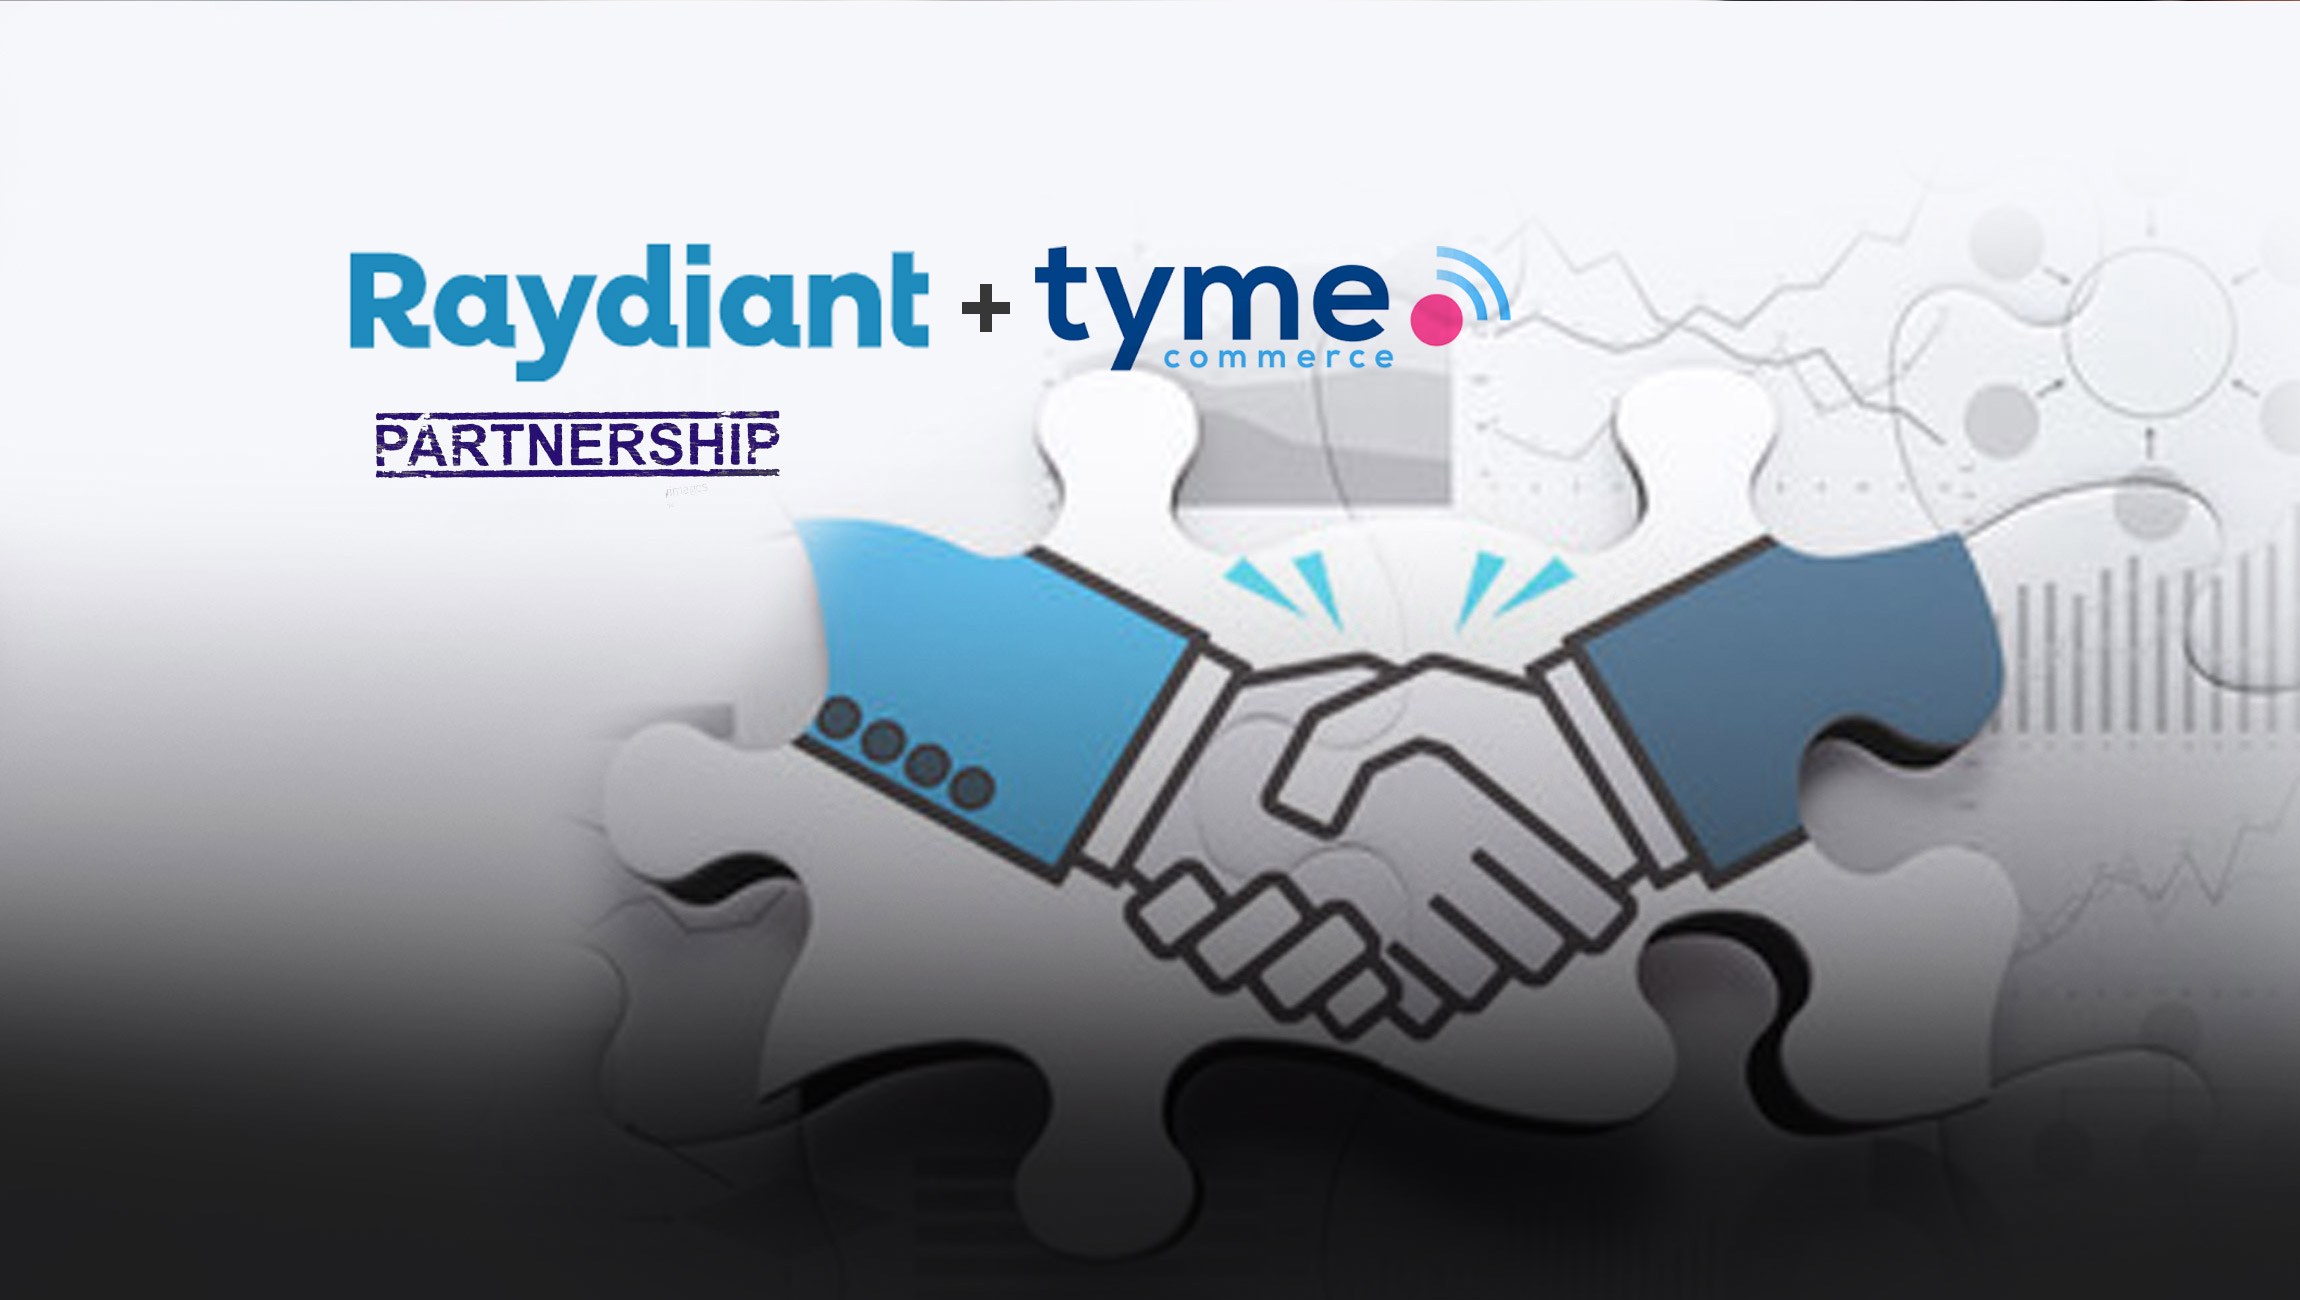 Raydiant Partners with Tyme to Offer Brick and Mortars a Customizable Self-Service Kiosk for Creating Their Own In-Store Experience